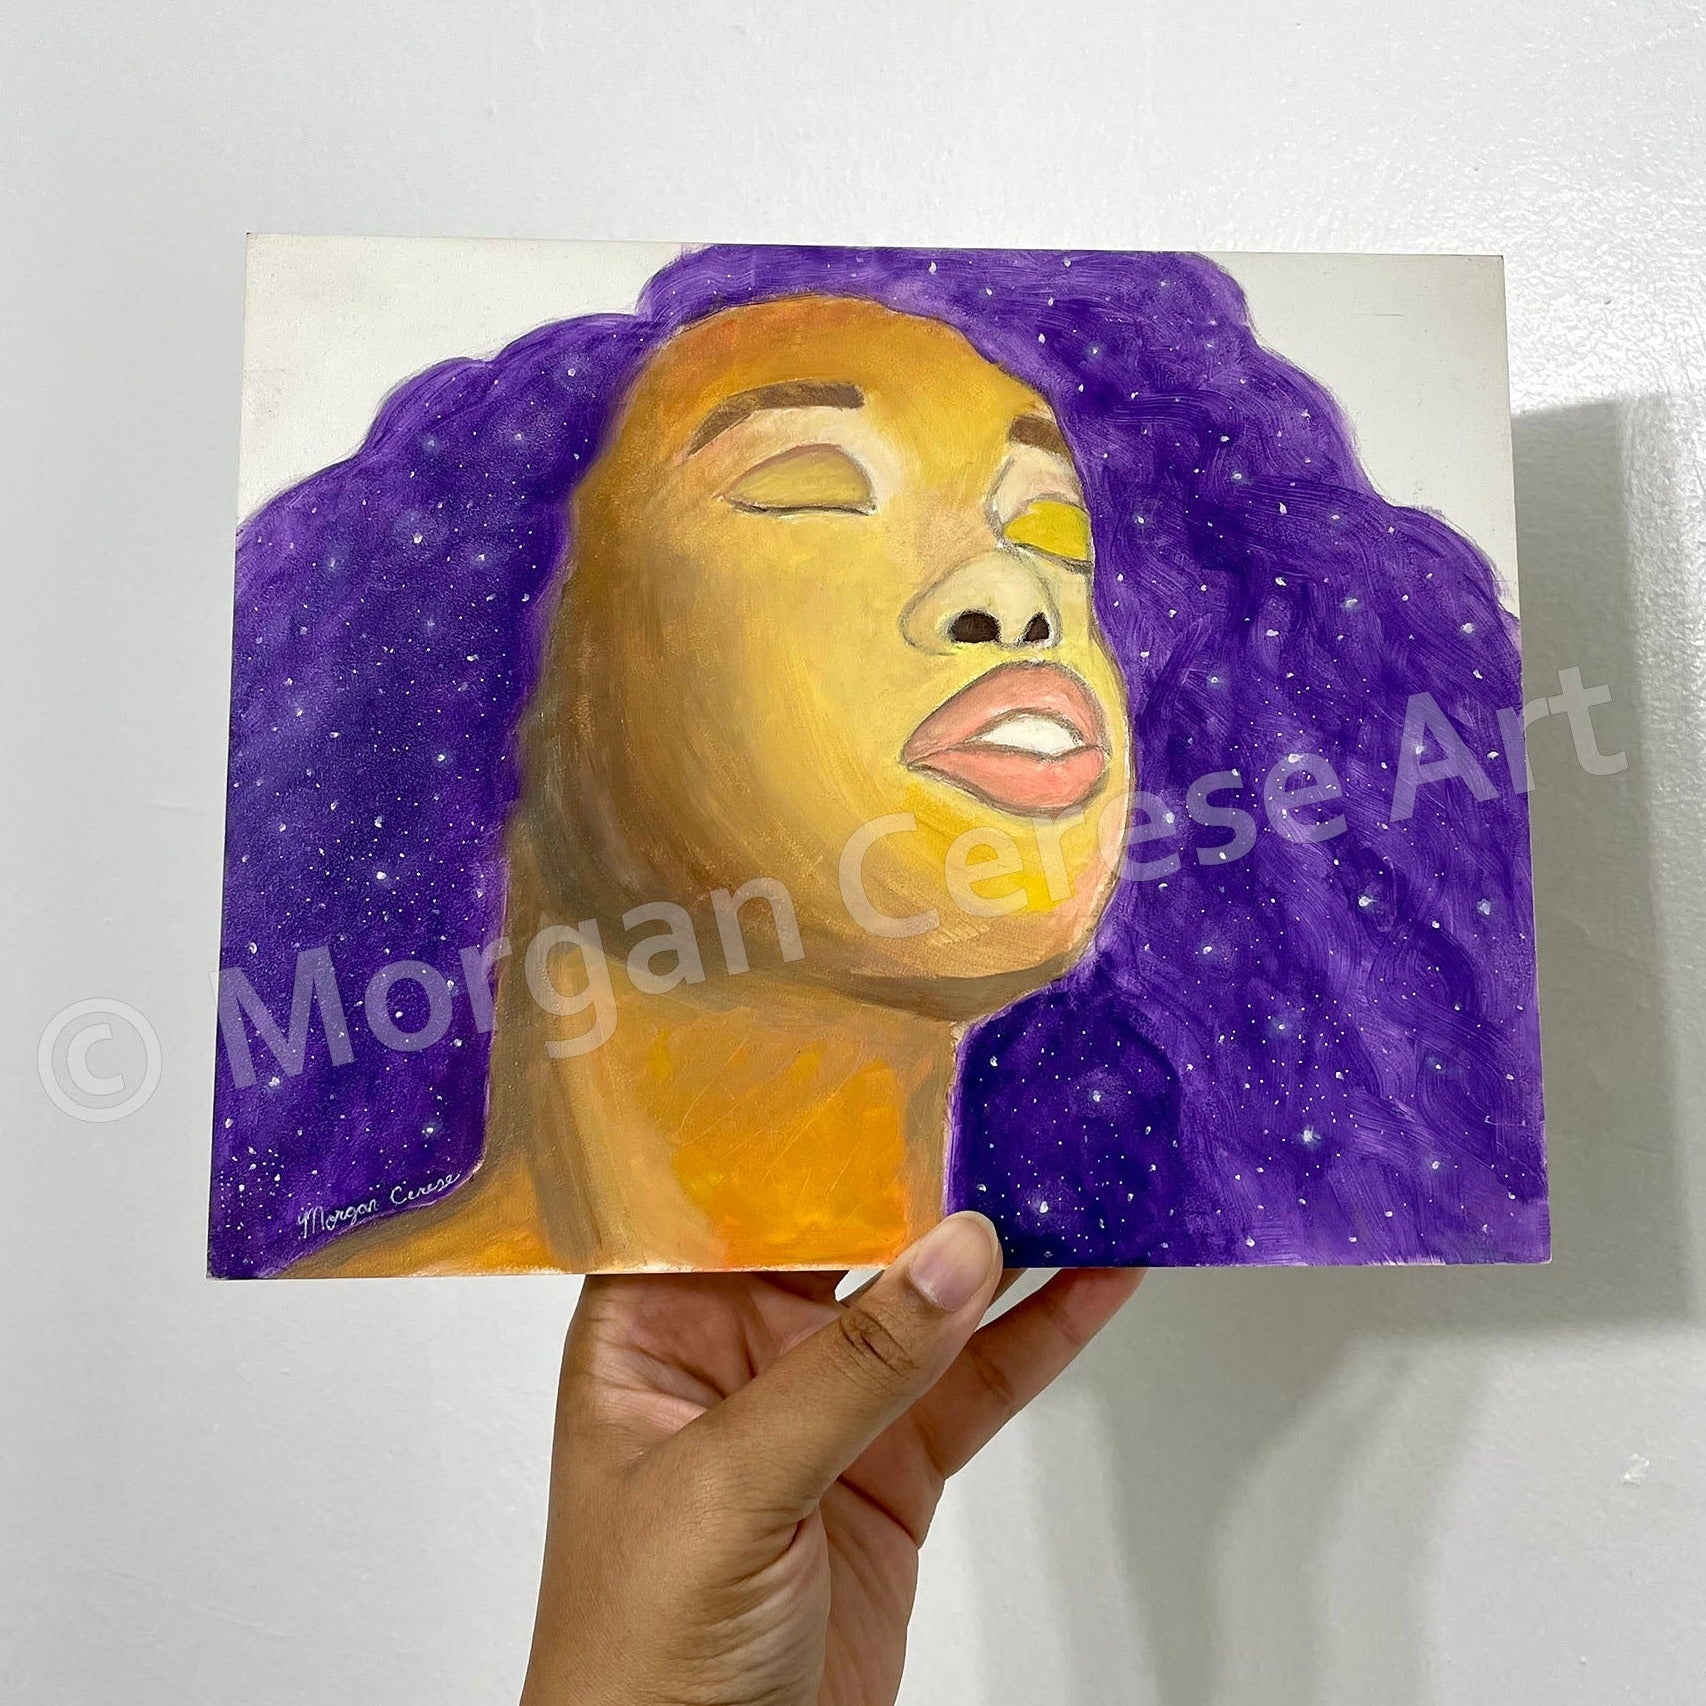 "Glow Up" Oil Painting - 8x10 inches - Morgan Cerese Art